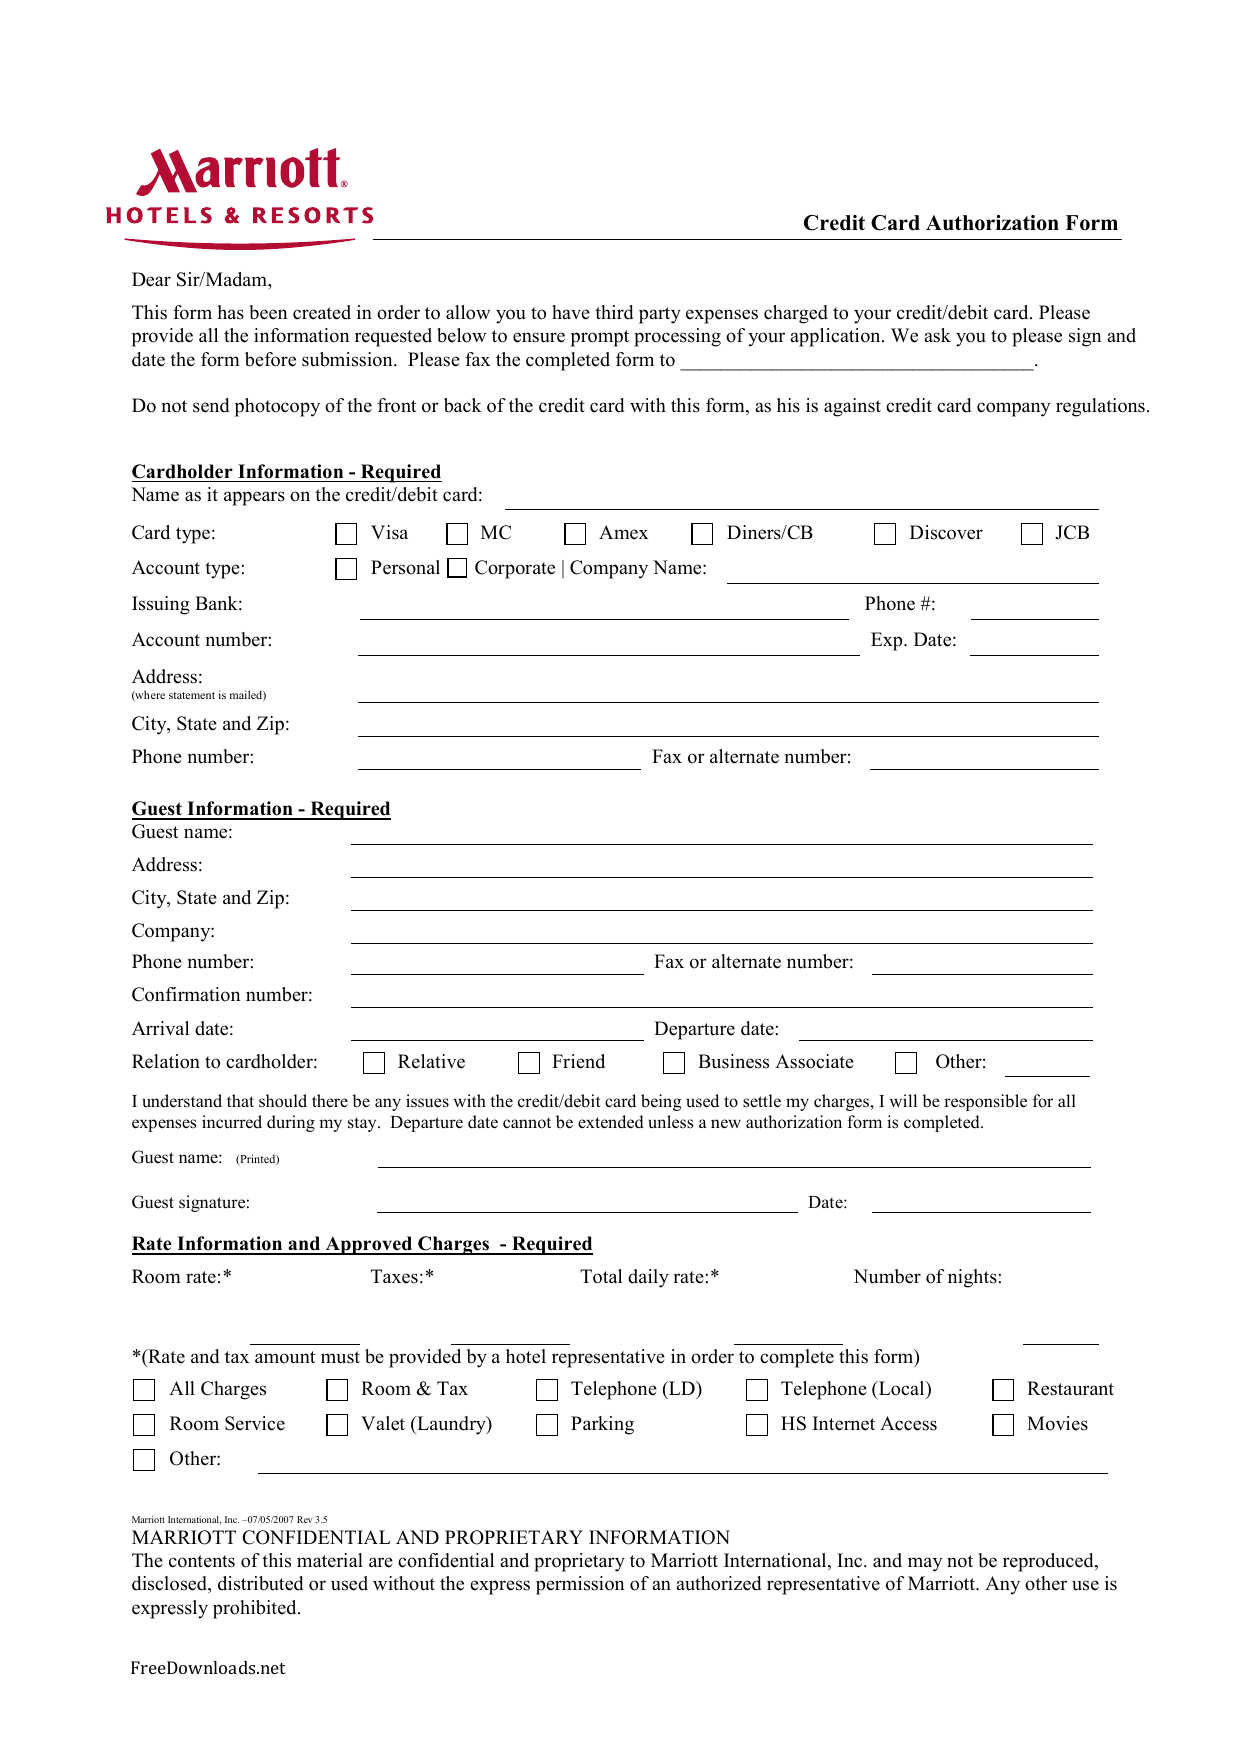 Download Marriott Credit Card Authorization Form Template PDF FreeDownloads